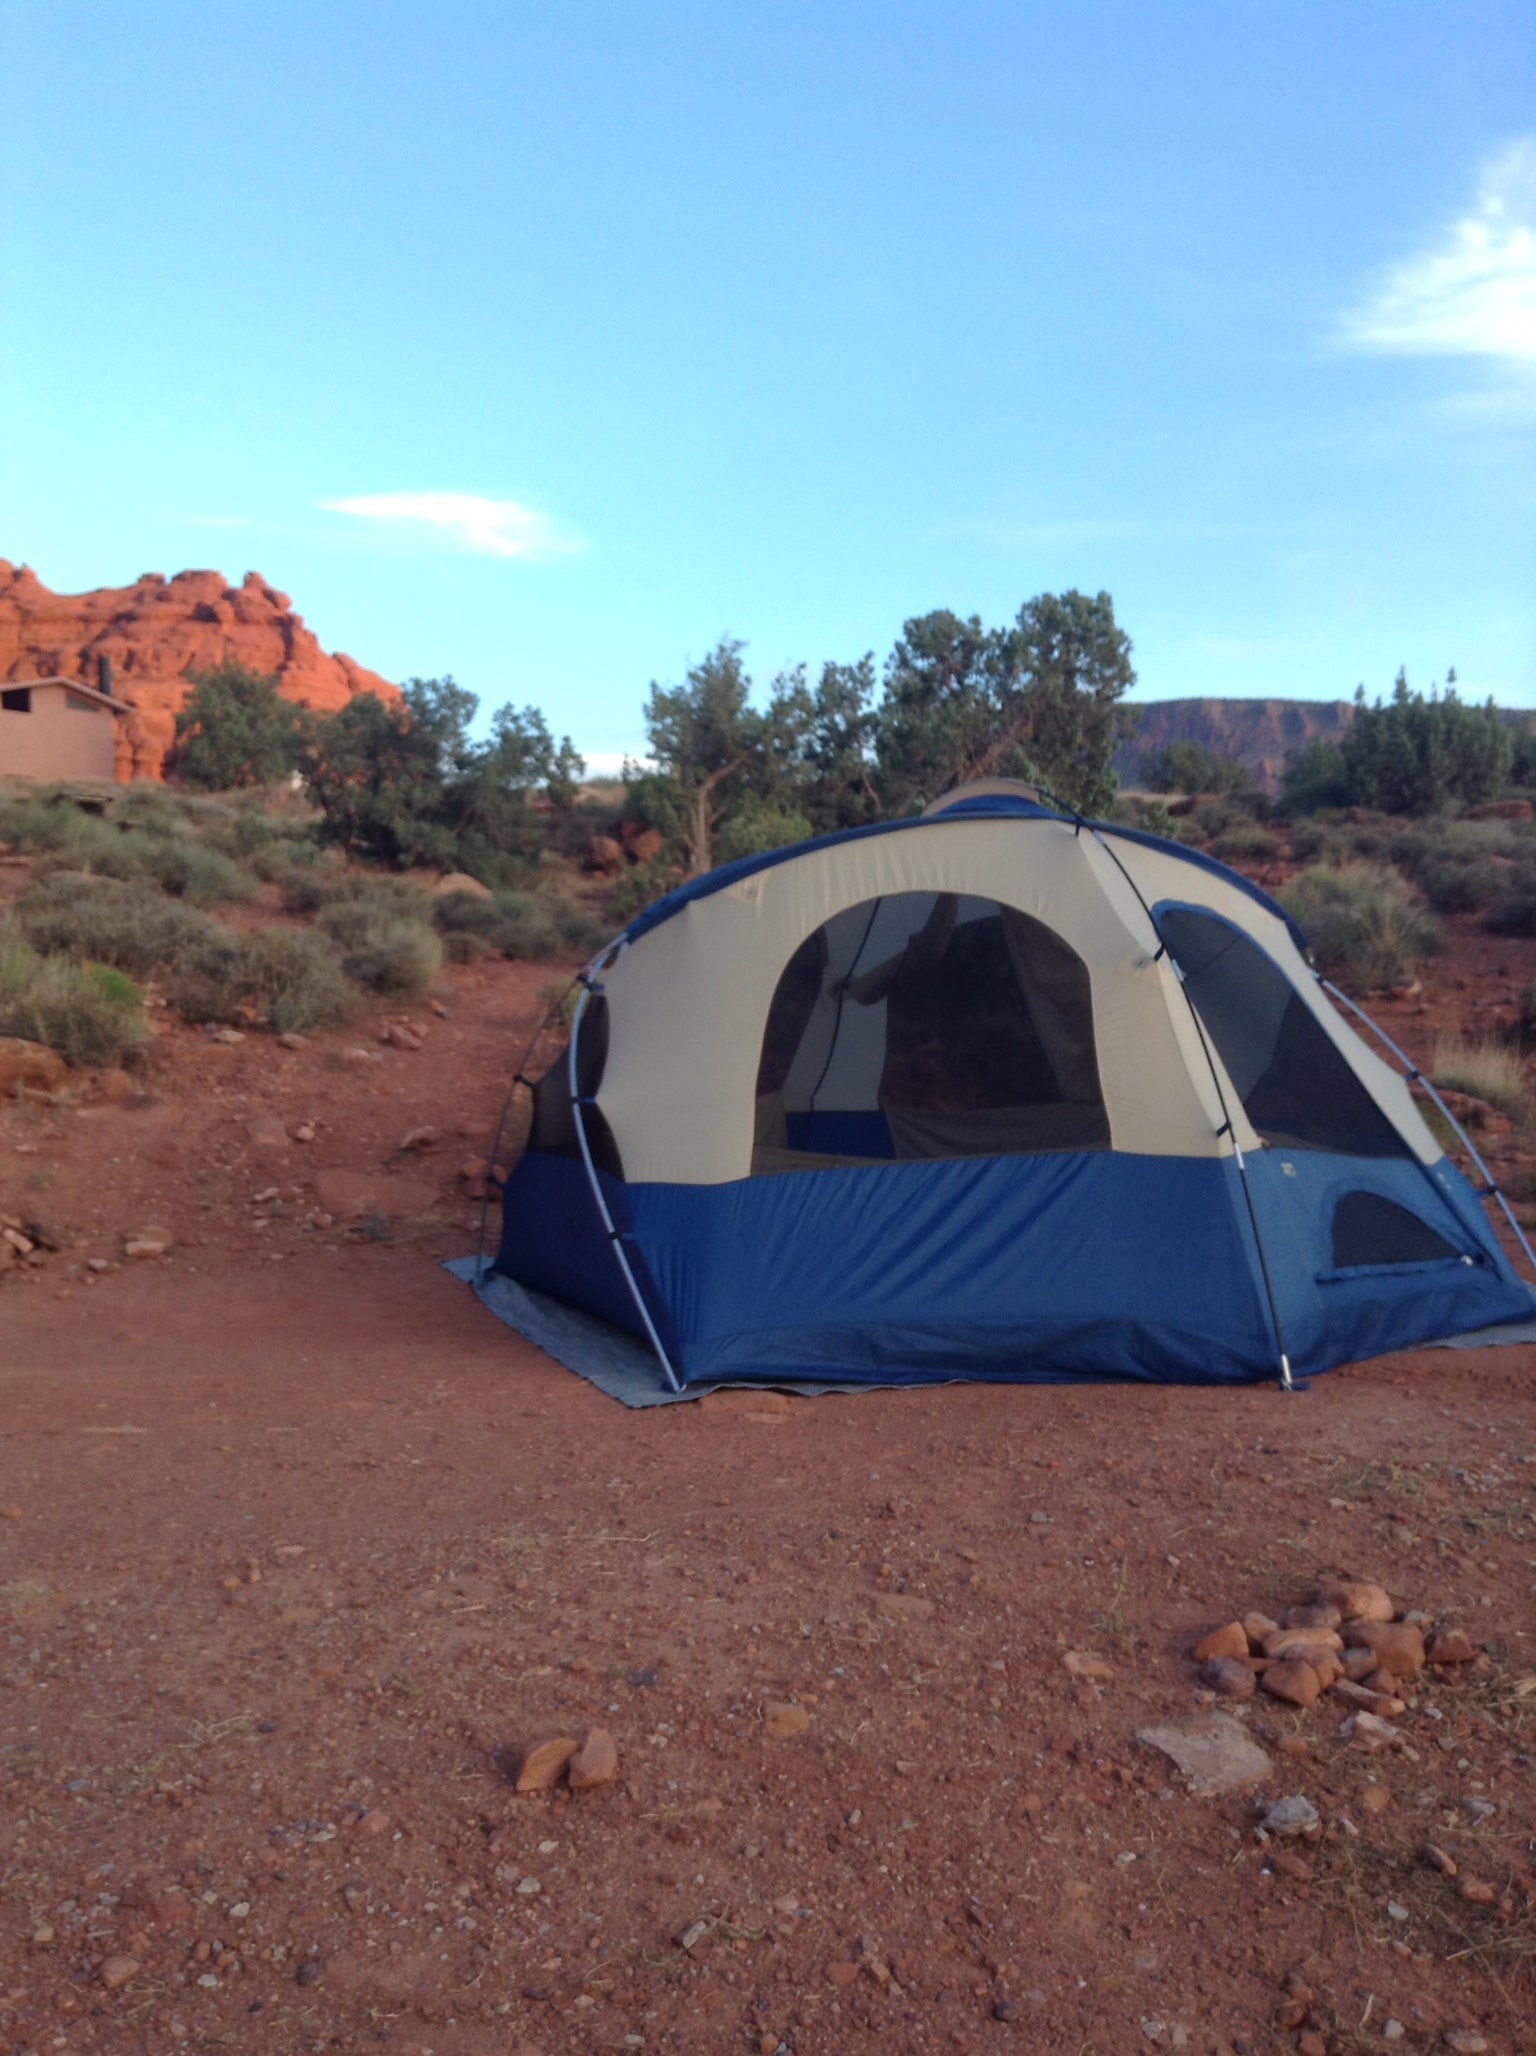 Camper submitted image from Fisher Towers Campground - 5